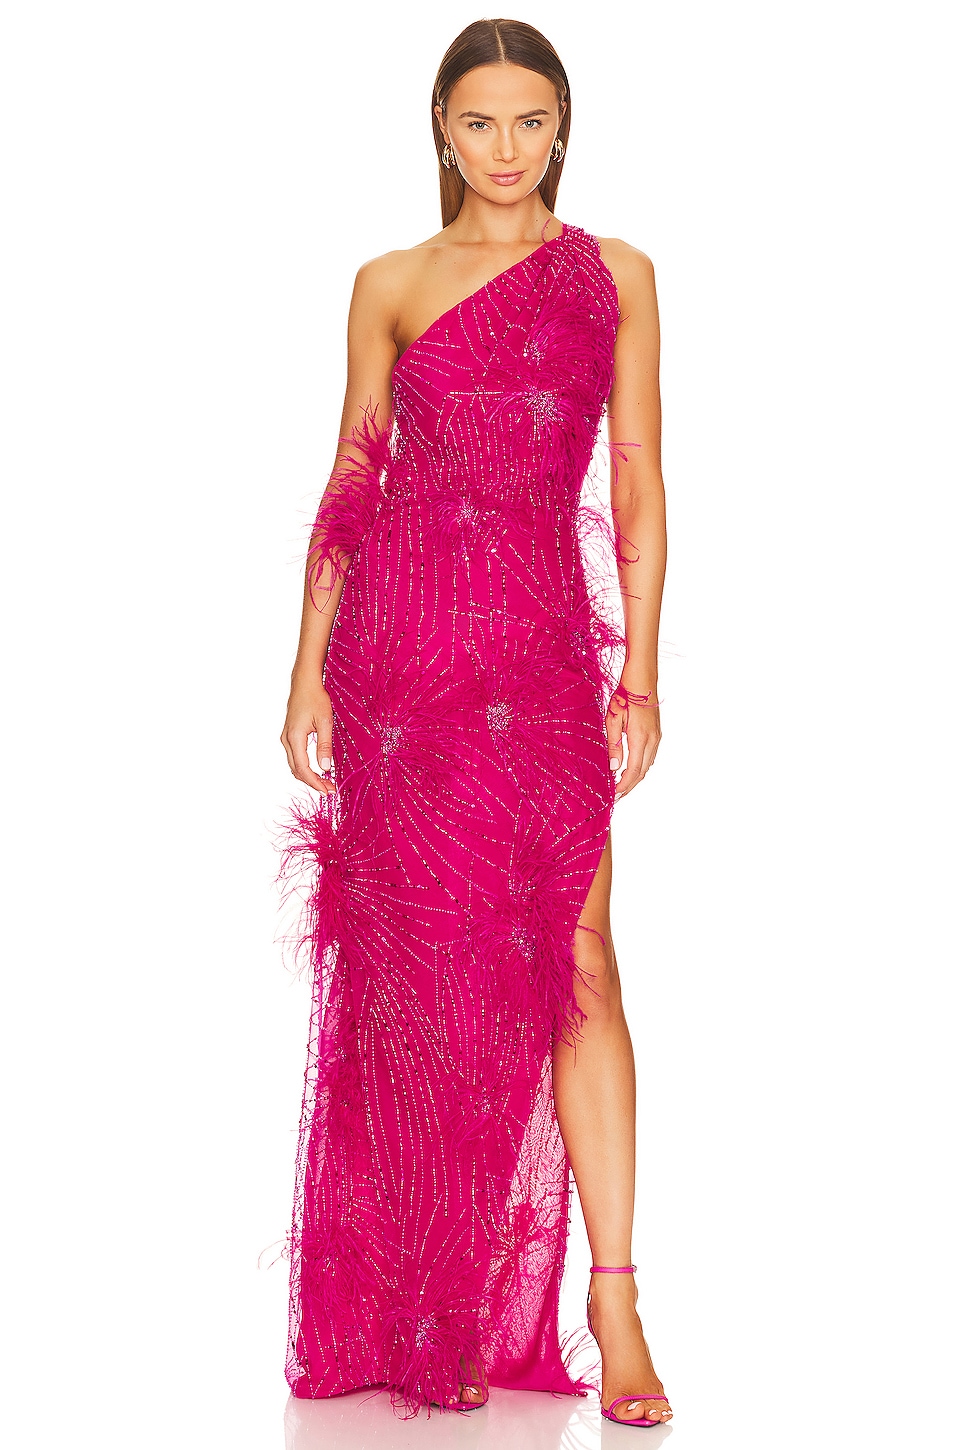 MadebyILA Julia Gown in Hot Pink | REVOLVE